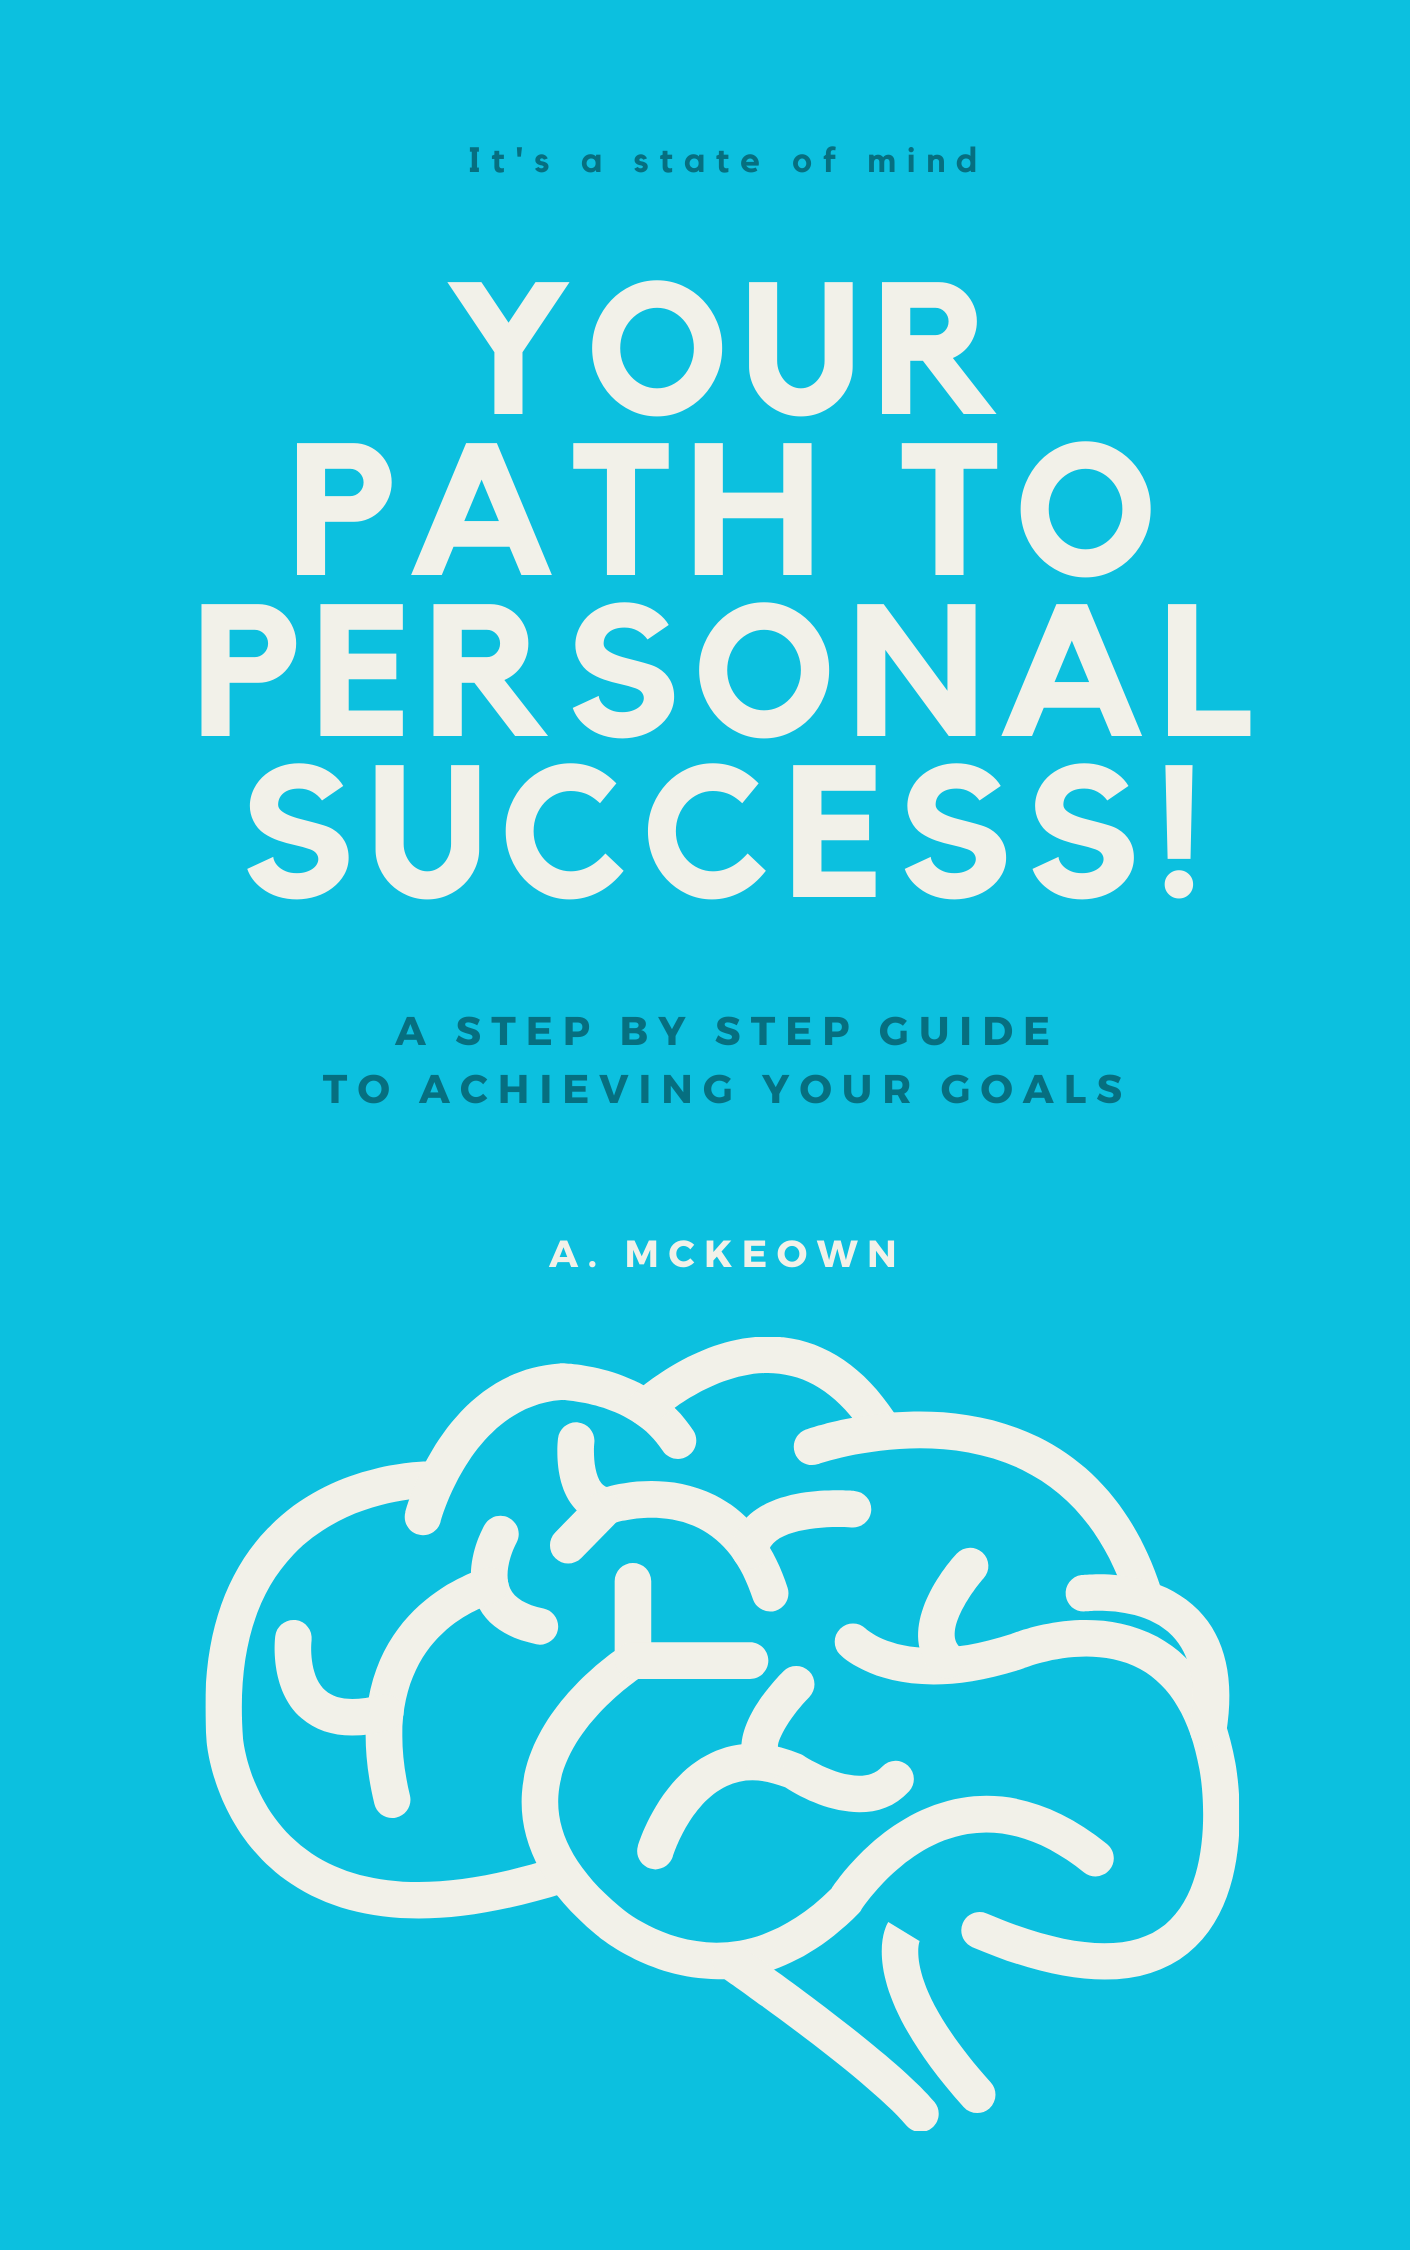 Your path to personal success